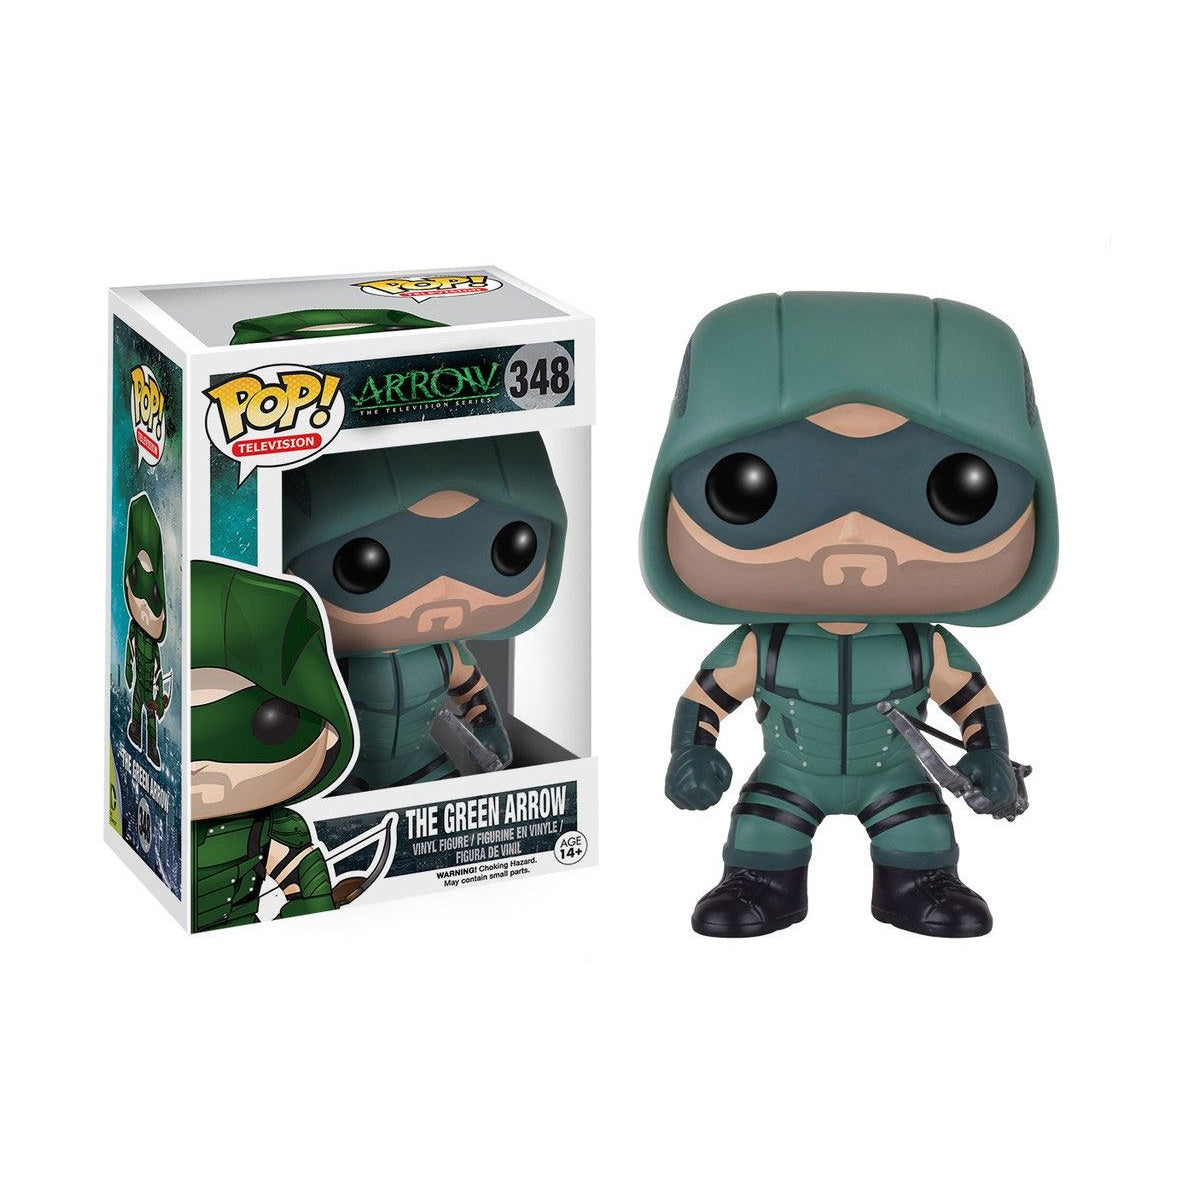 Funko POP! Television: Arrow the Television Series - The Green Arrow #348 Vinyl Figure (Pre-owned) (Box Wear)